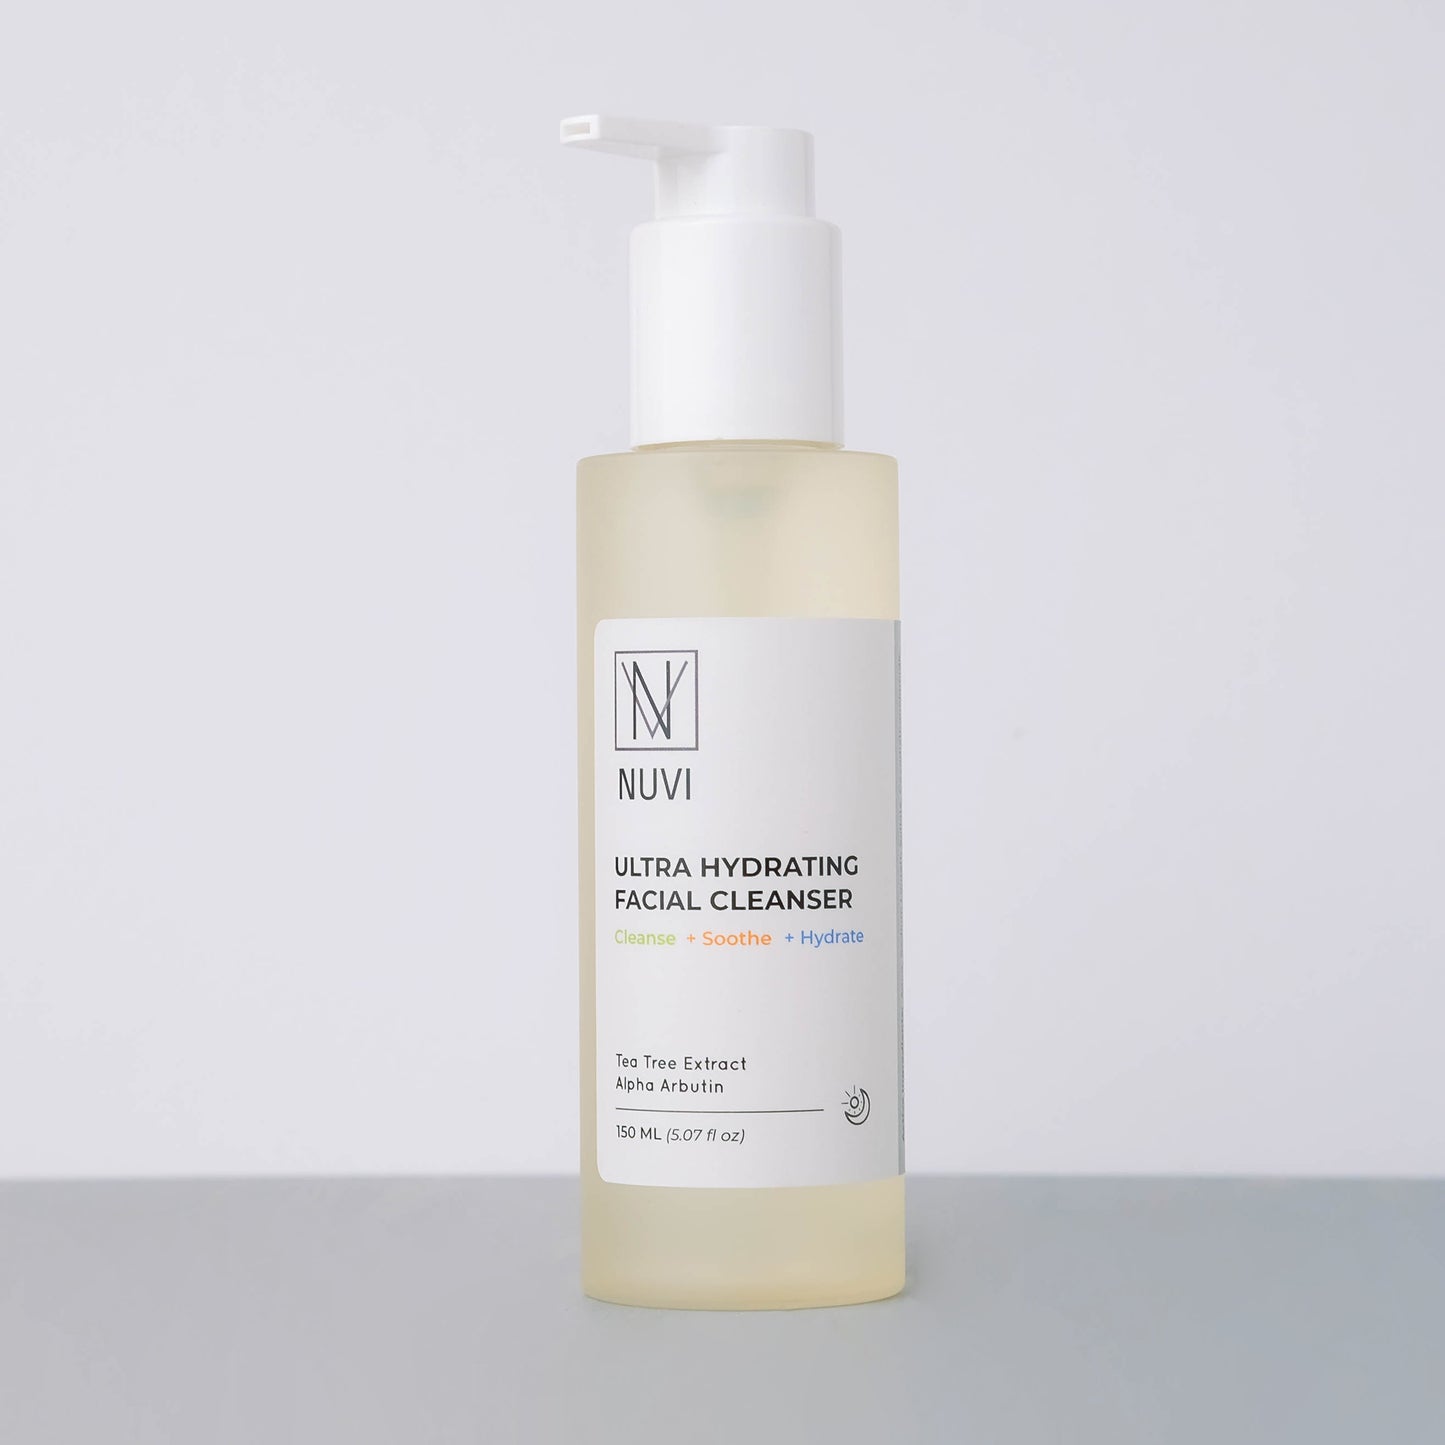 NUVI Ultra Hydrating Facial Cleanser